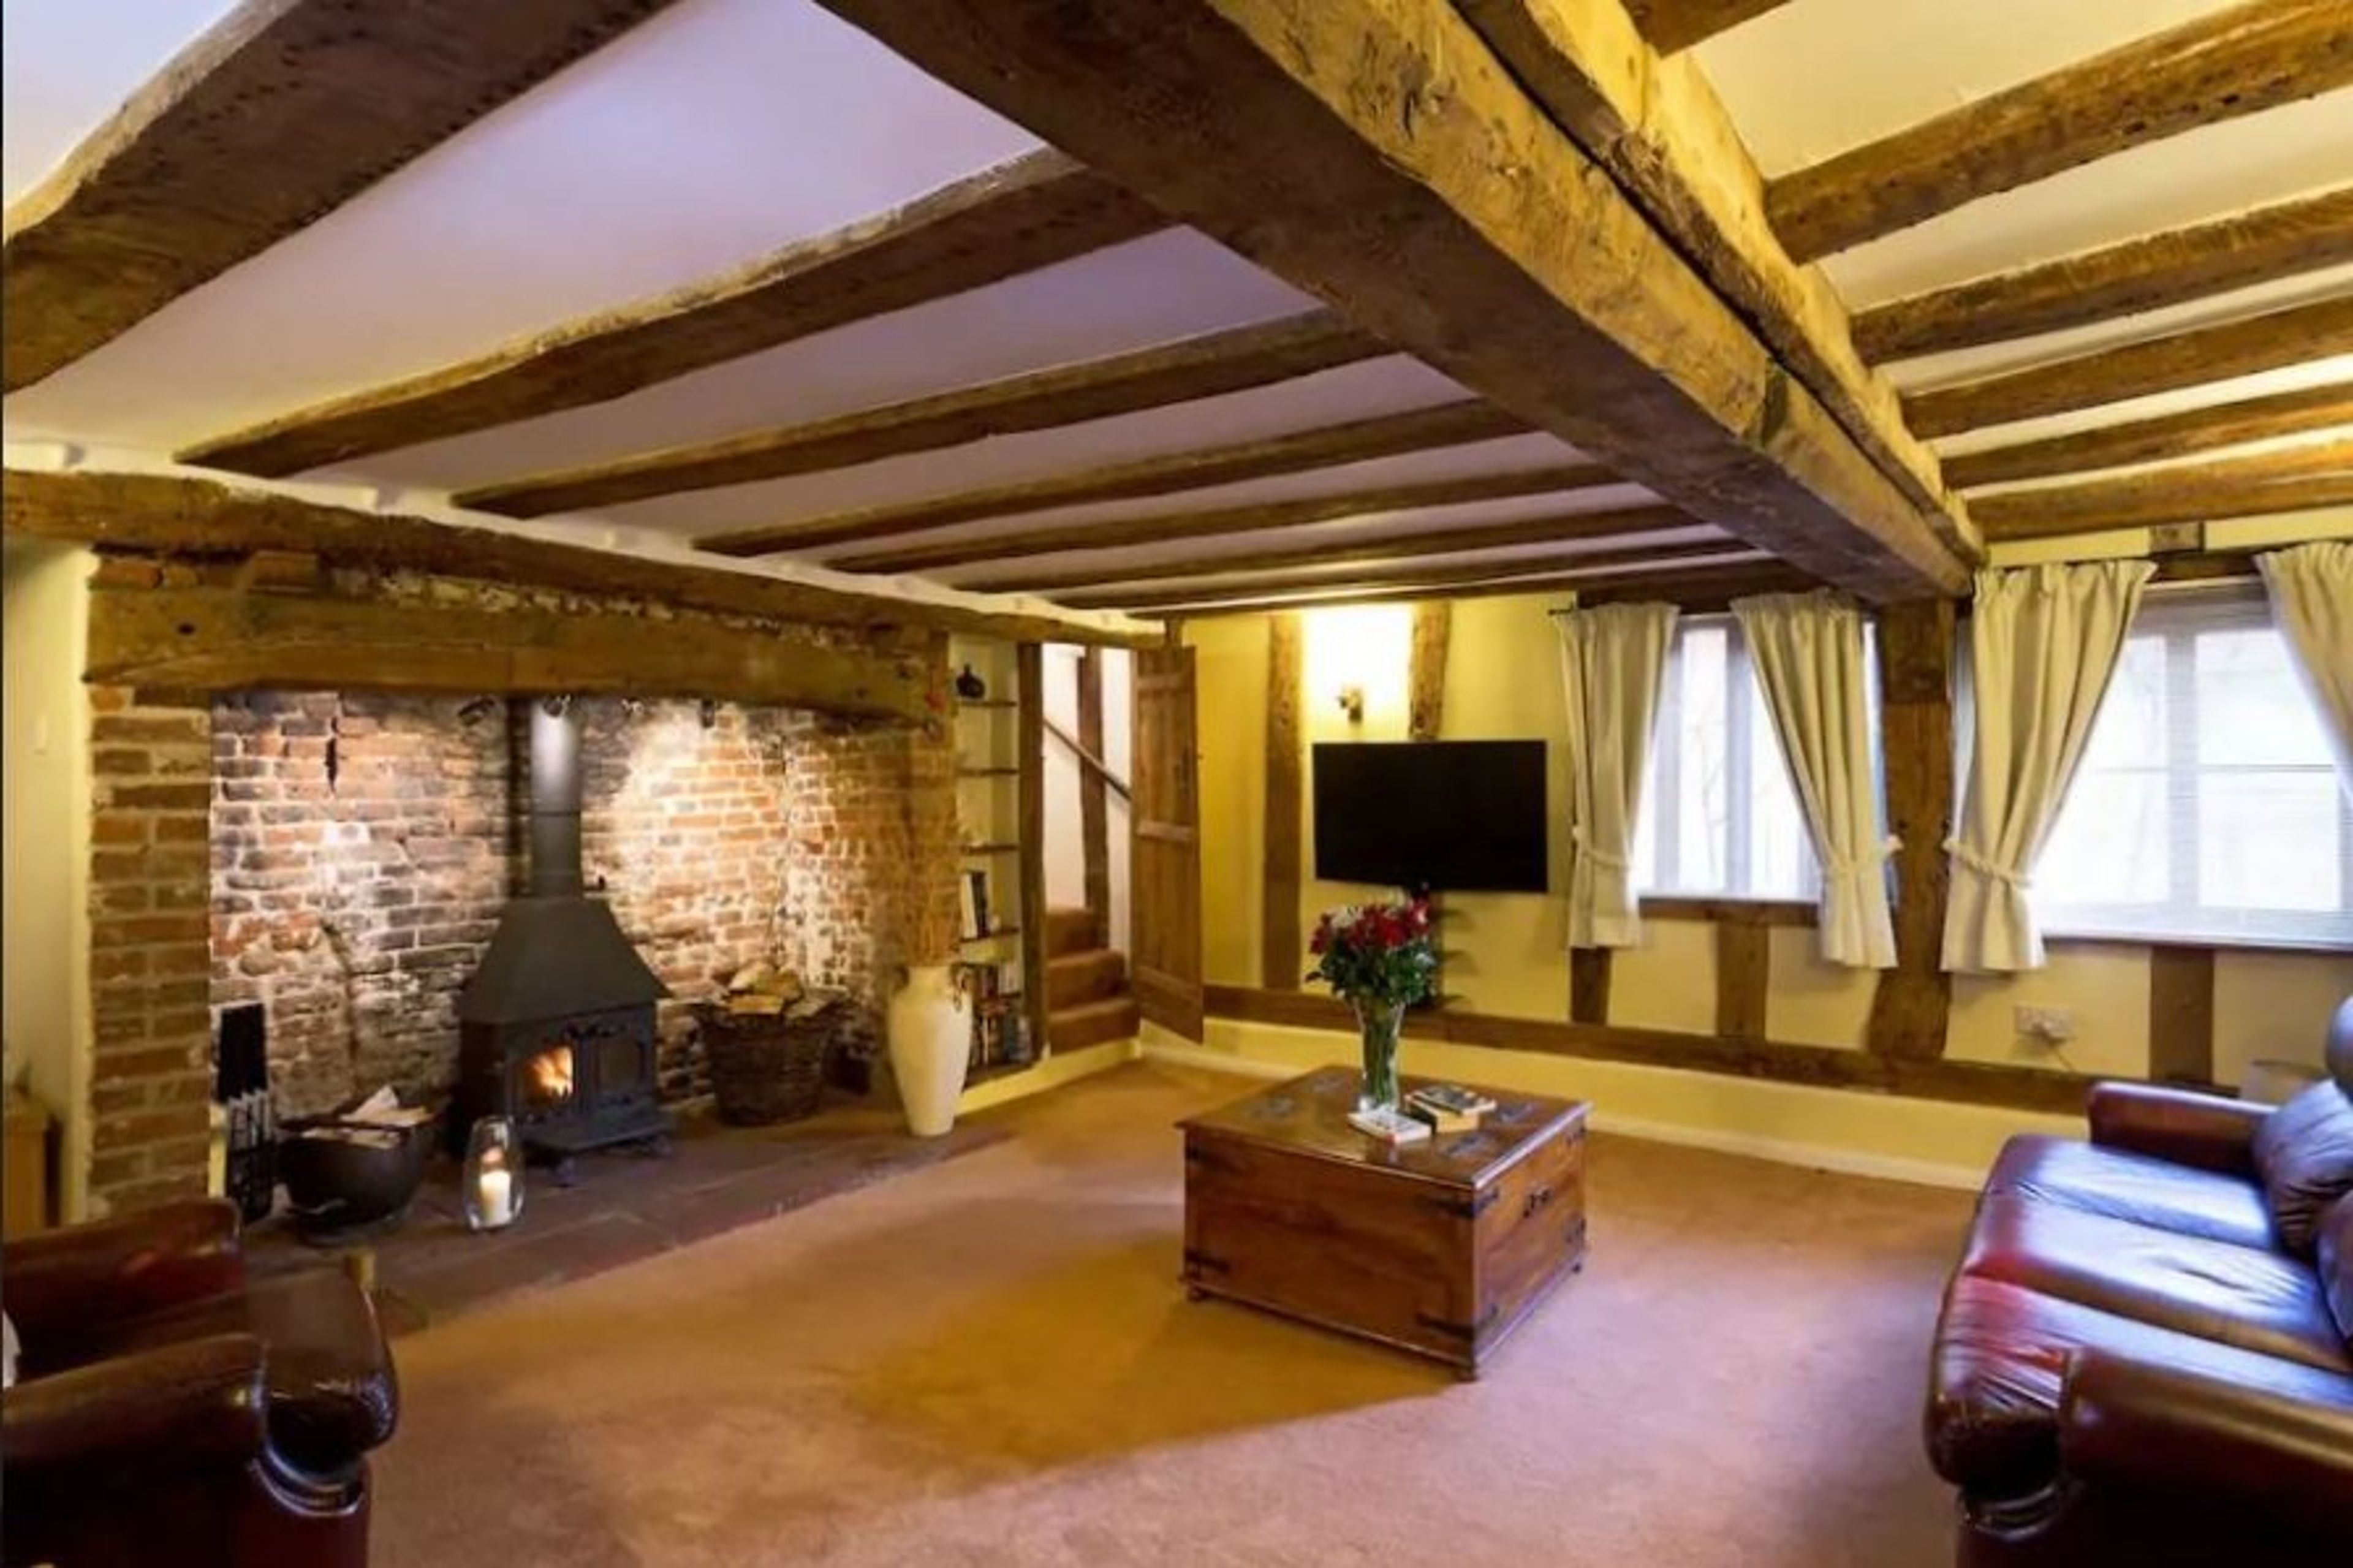 Lounge with large inglenook fireplace and exposed beams.